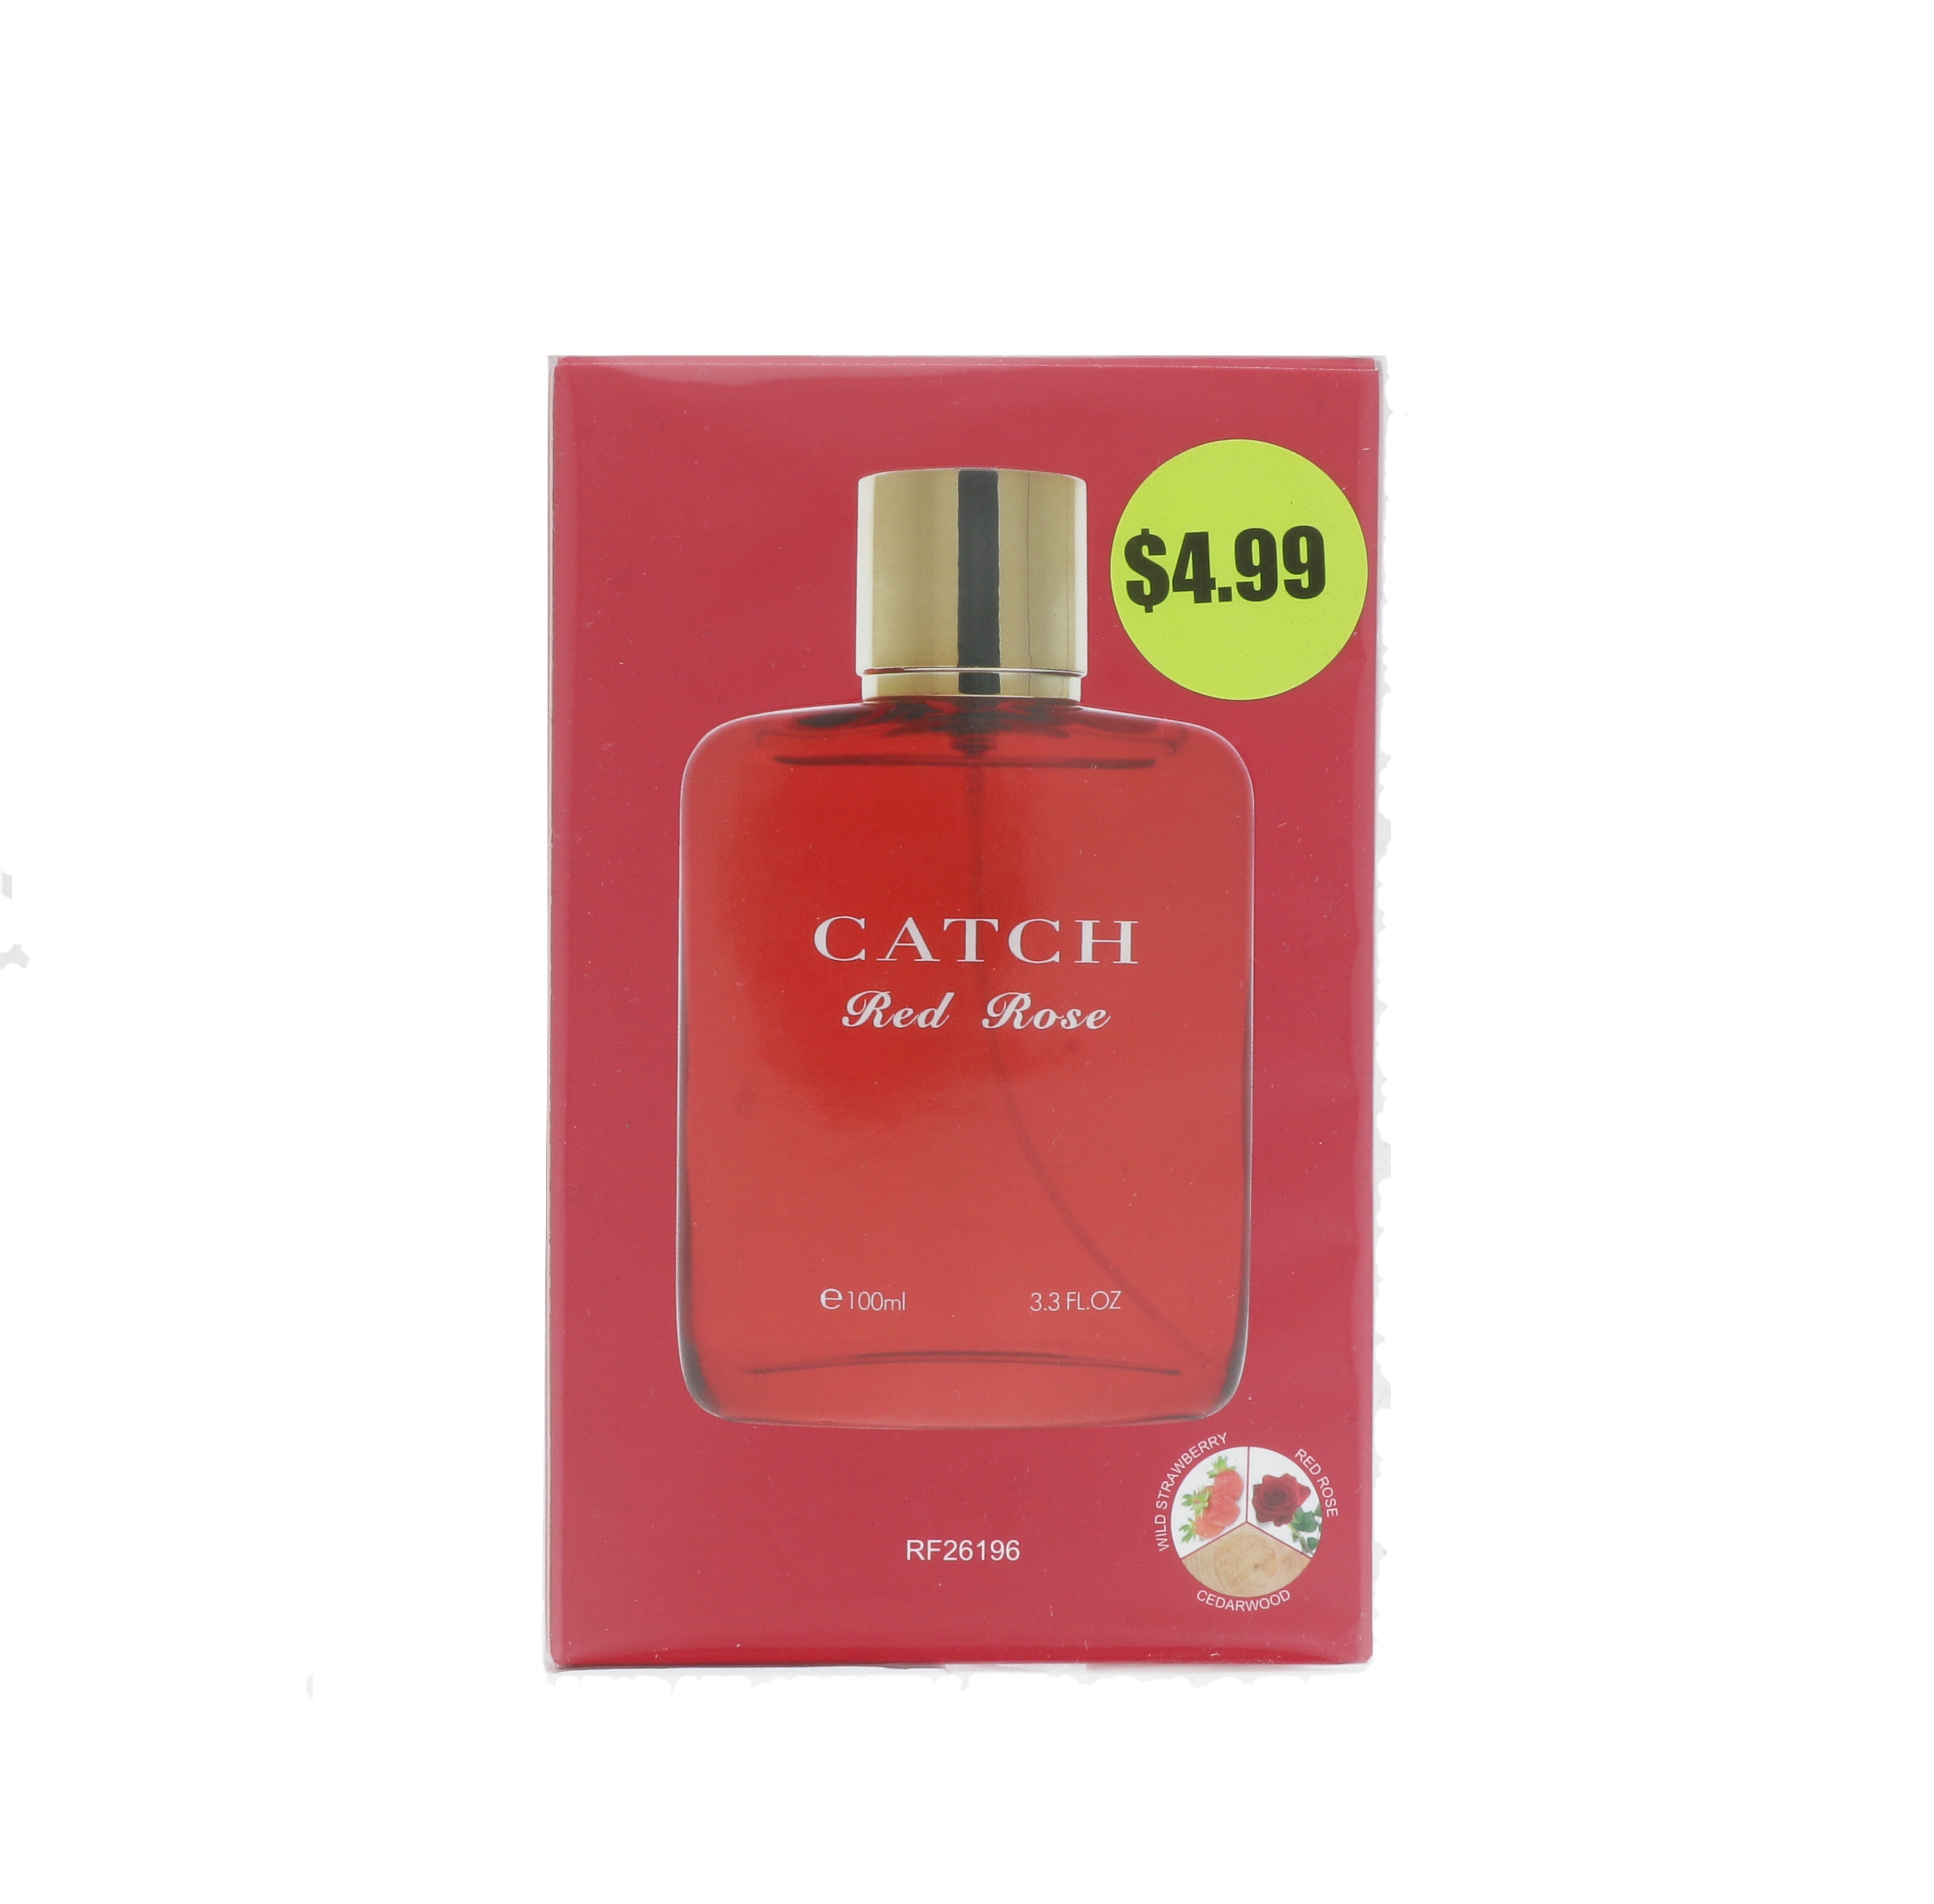 4.99 CATCH RED ROSE